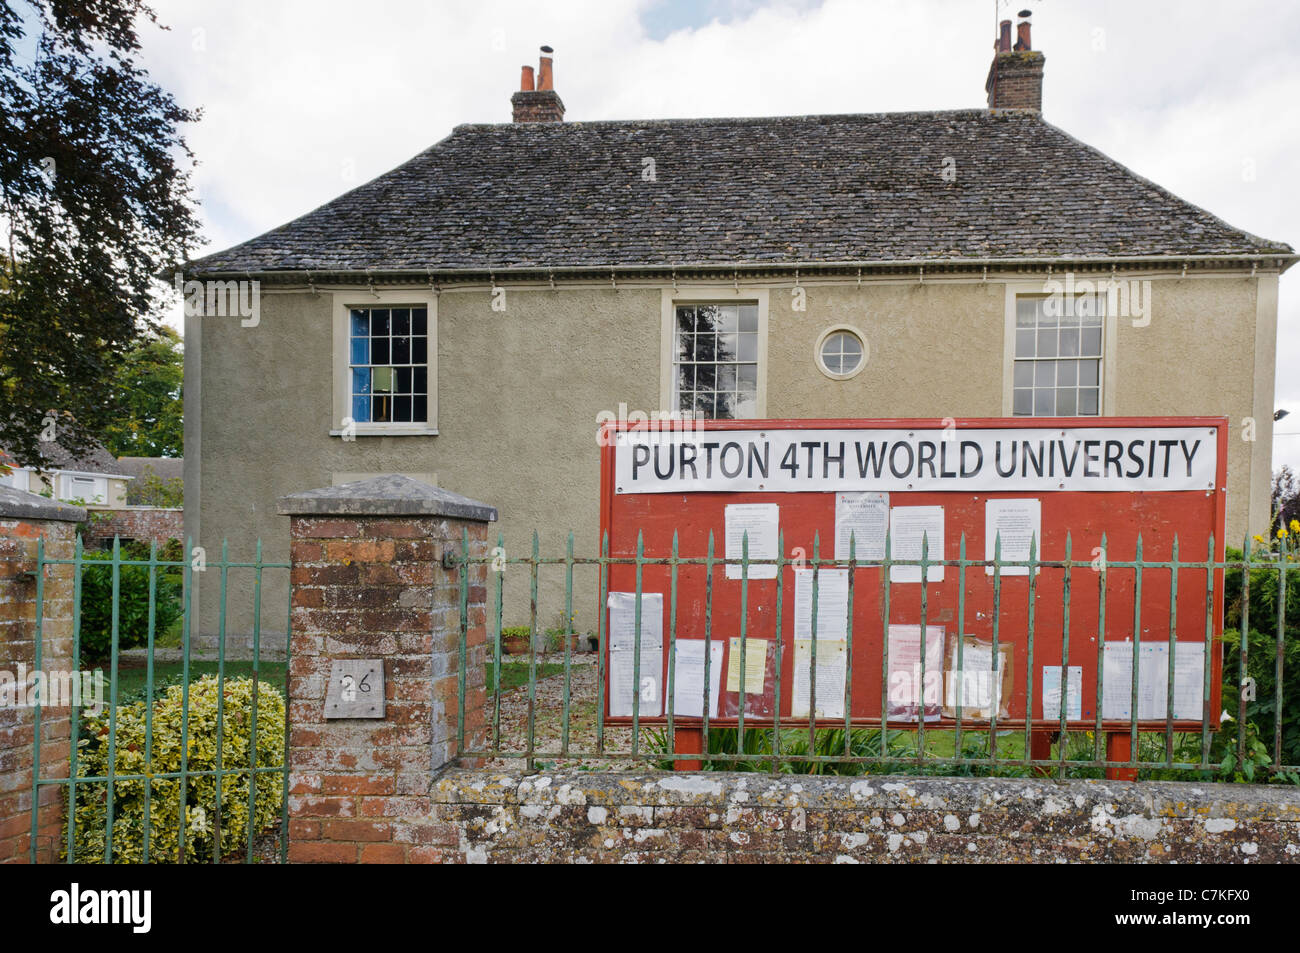 Purton 4th World University, established 2009 by John Papworth, a former Anglican priest turned ecologist.  According to their website the University Stock Photo